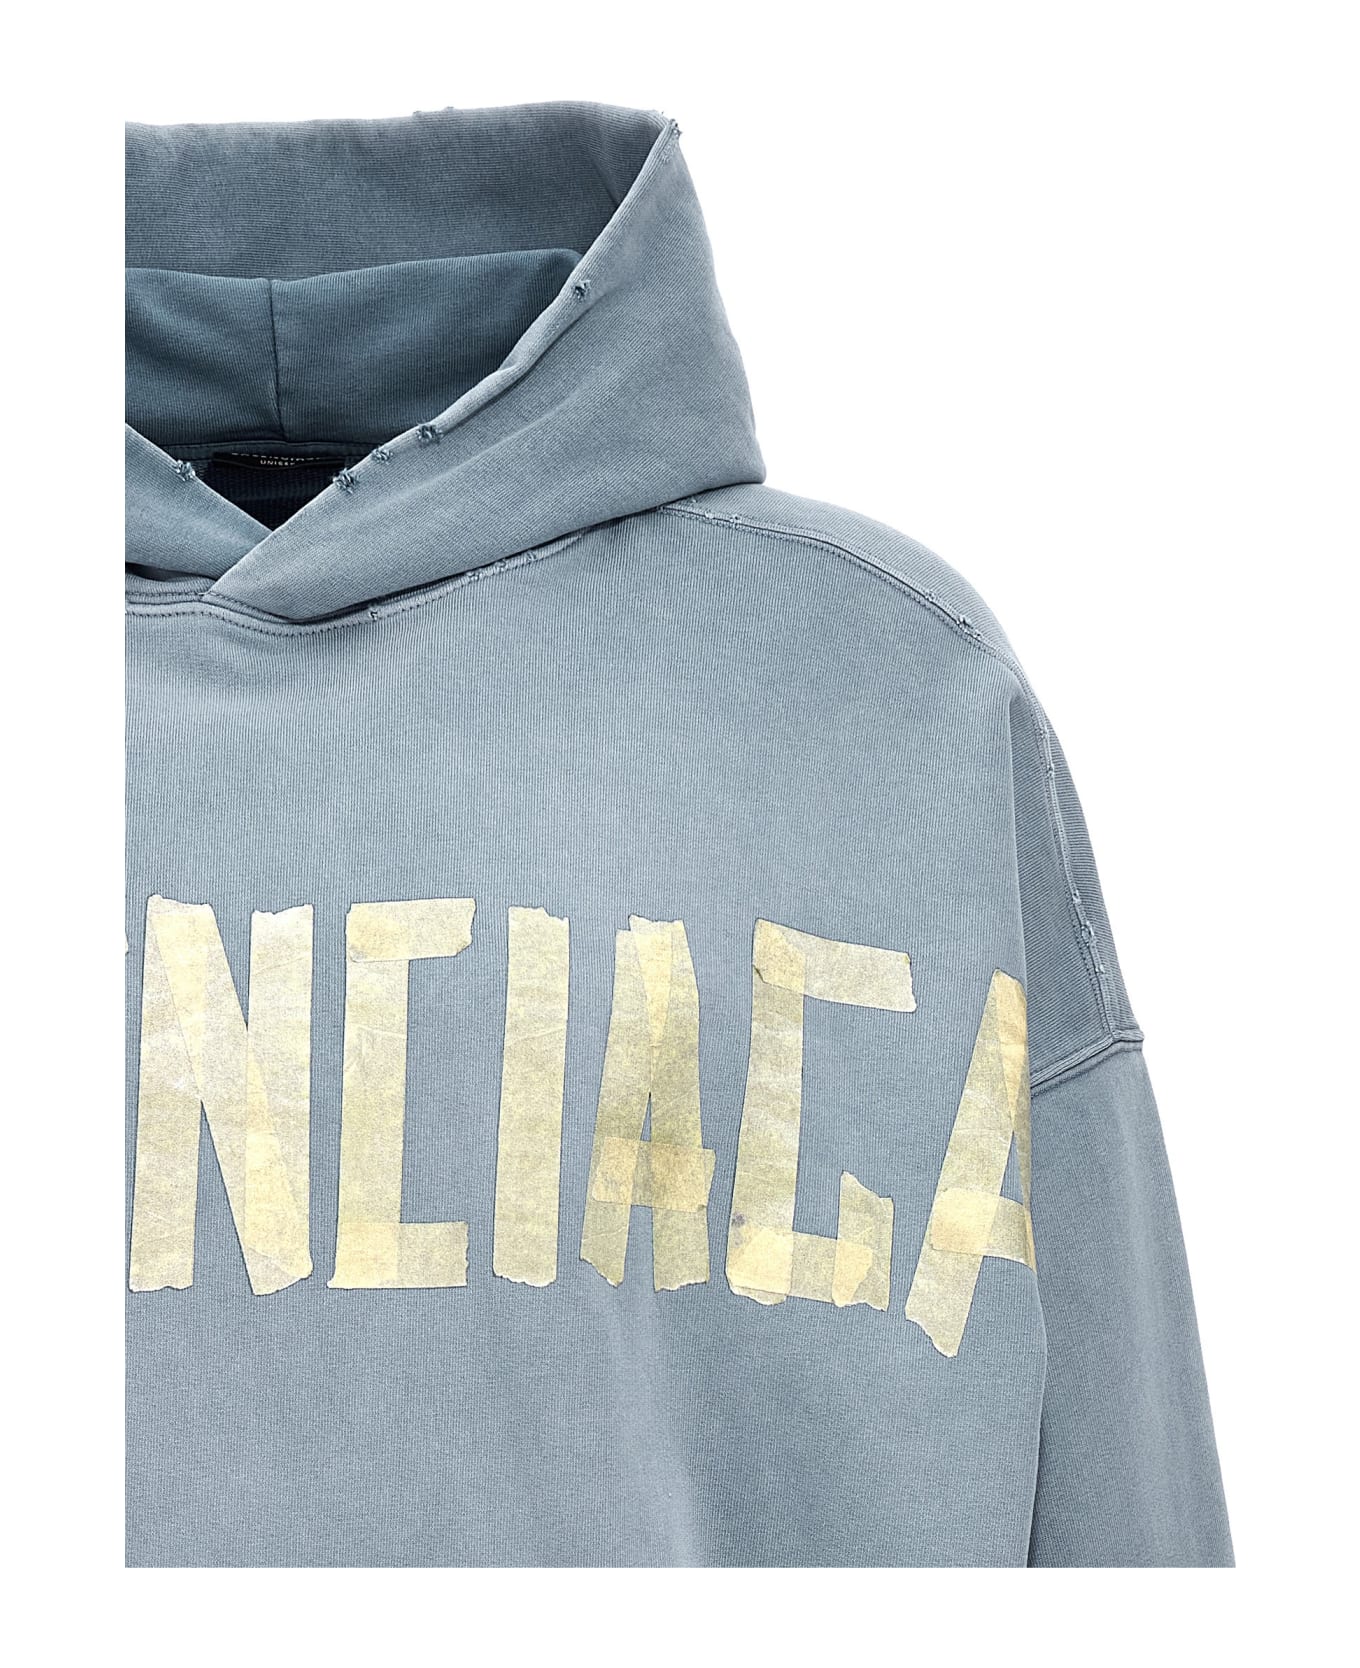 Balenciaga 'ripped Pocket Tape Type' Hoodie - Faded blue